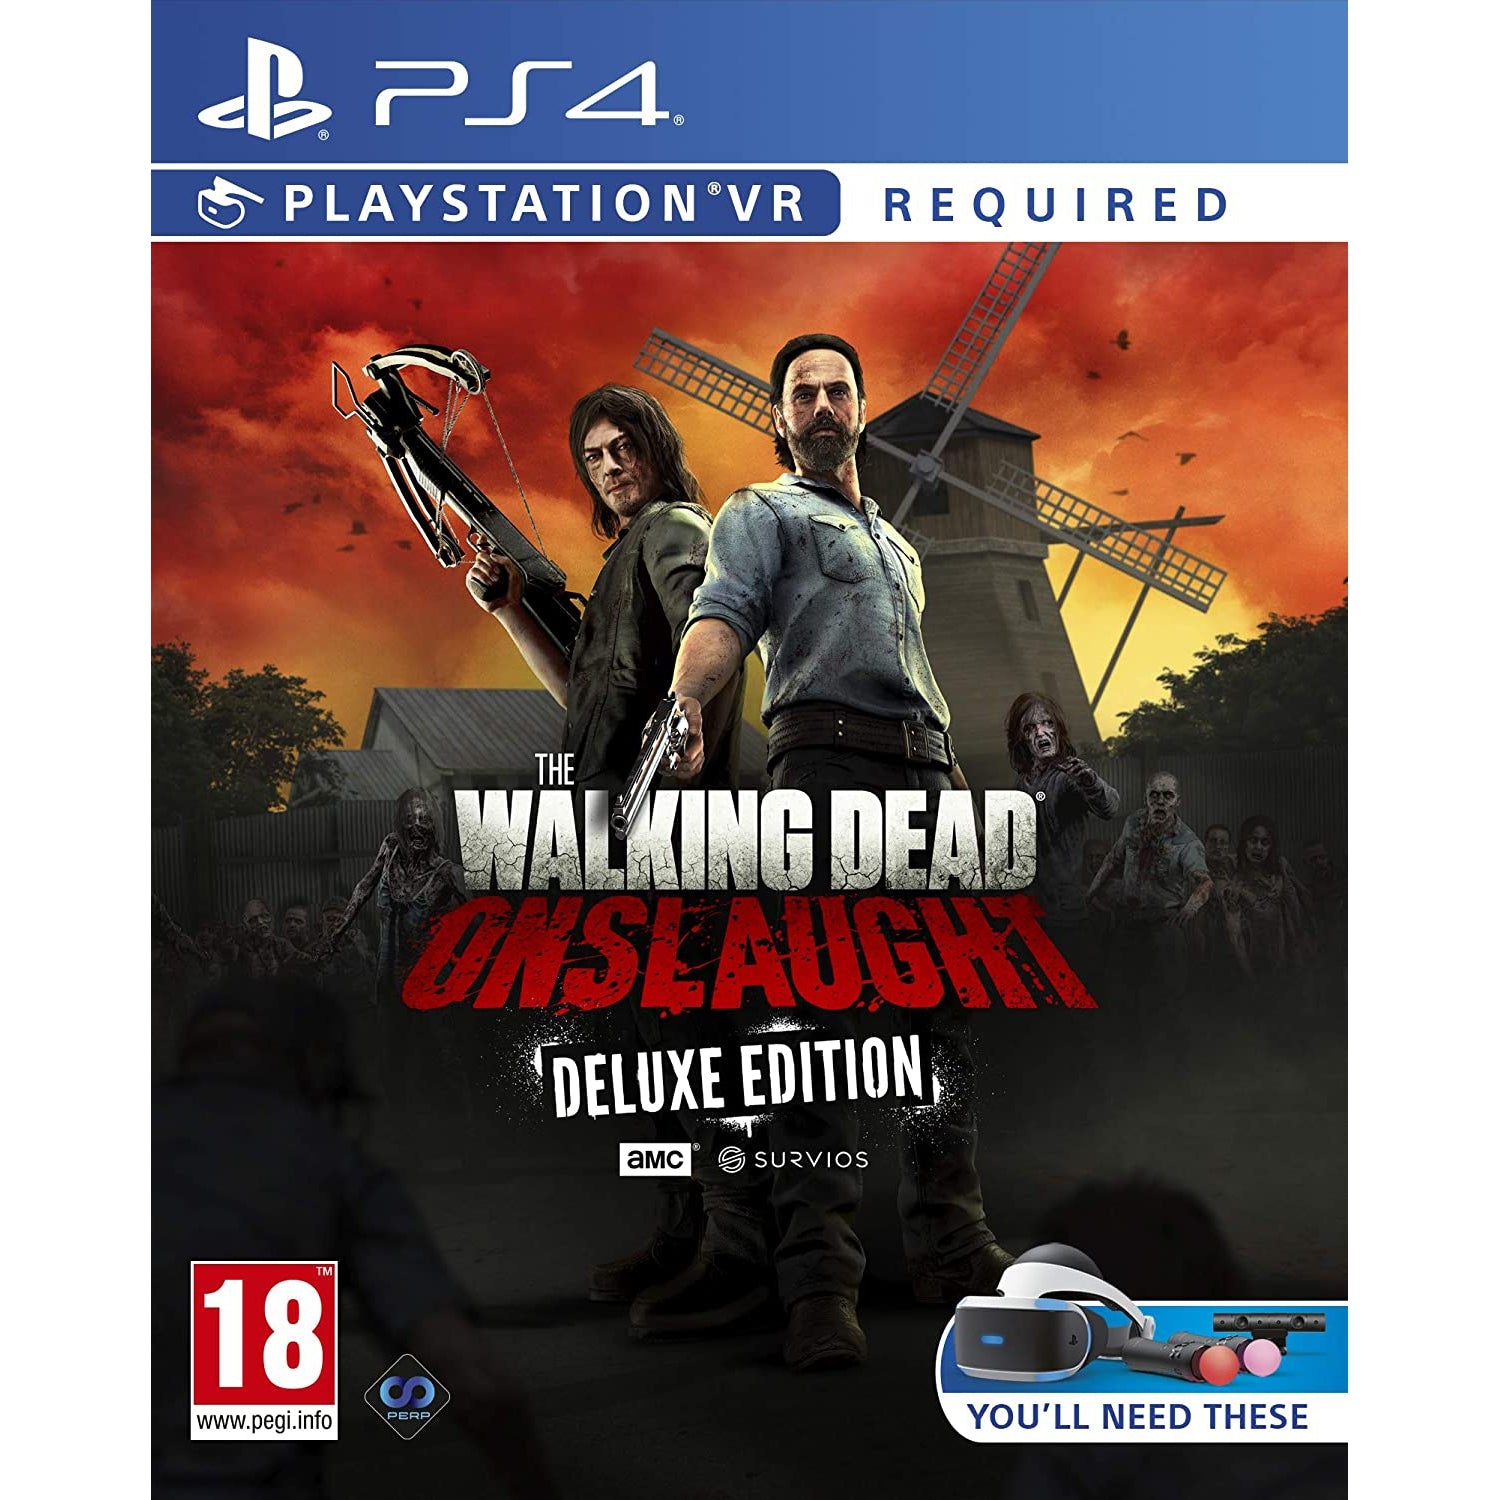 The Walking Dead: Onslaught Deluxe Edition PSVR (PS4)